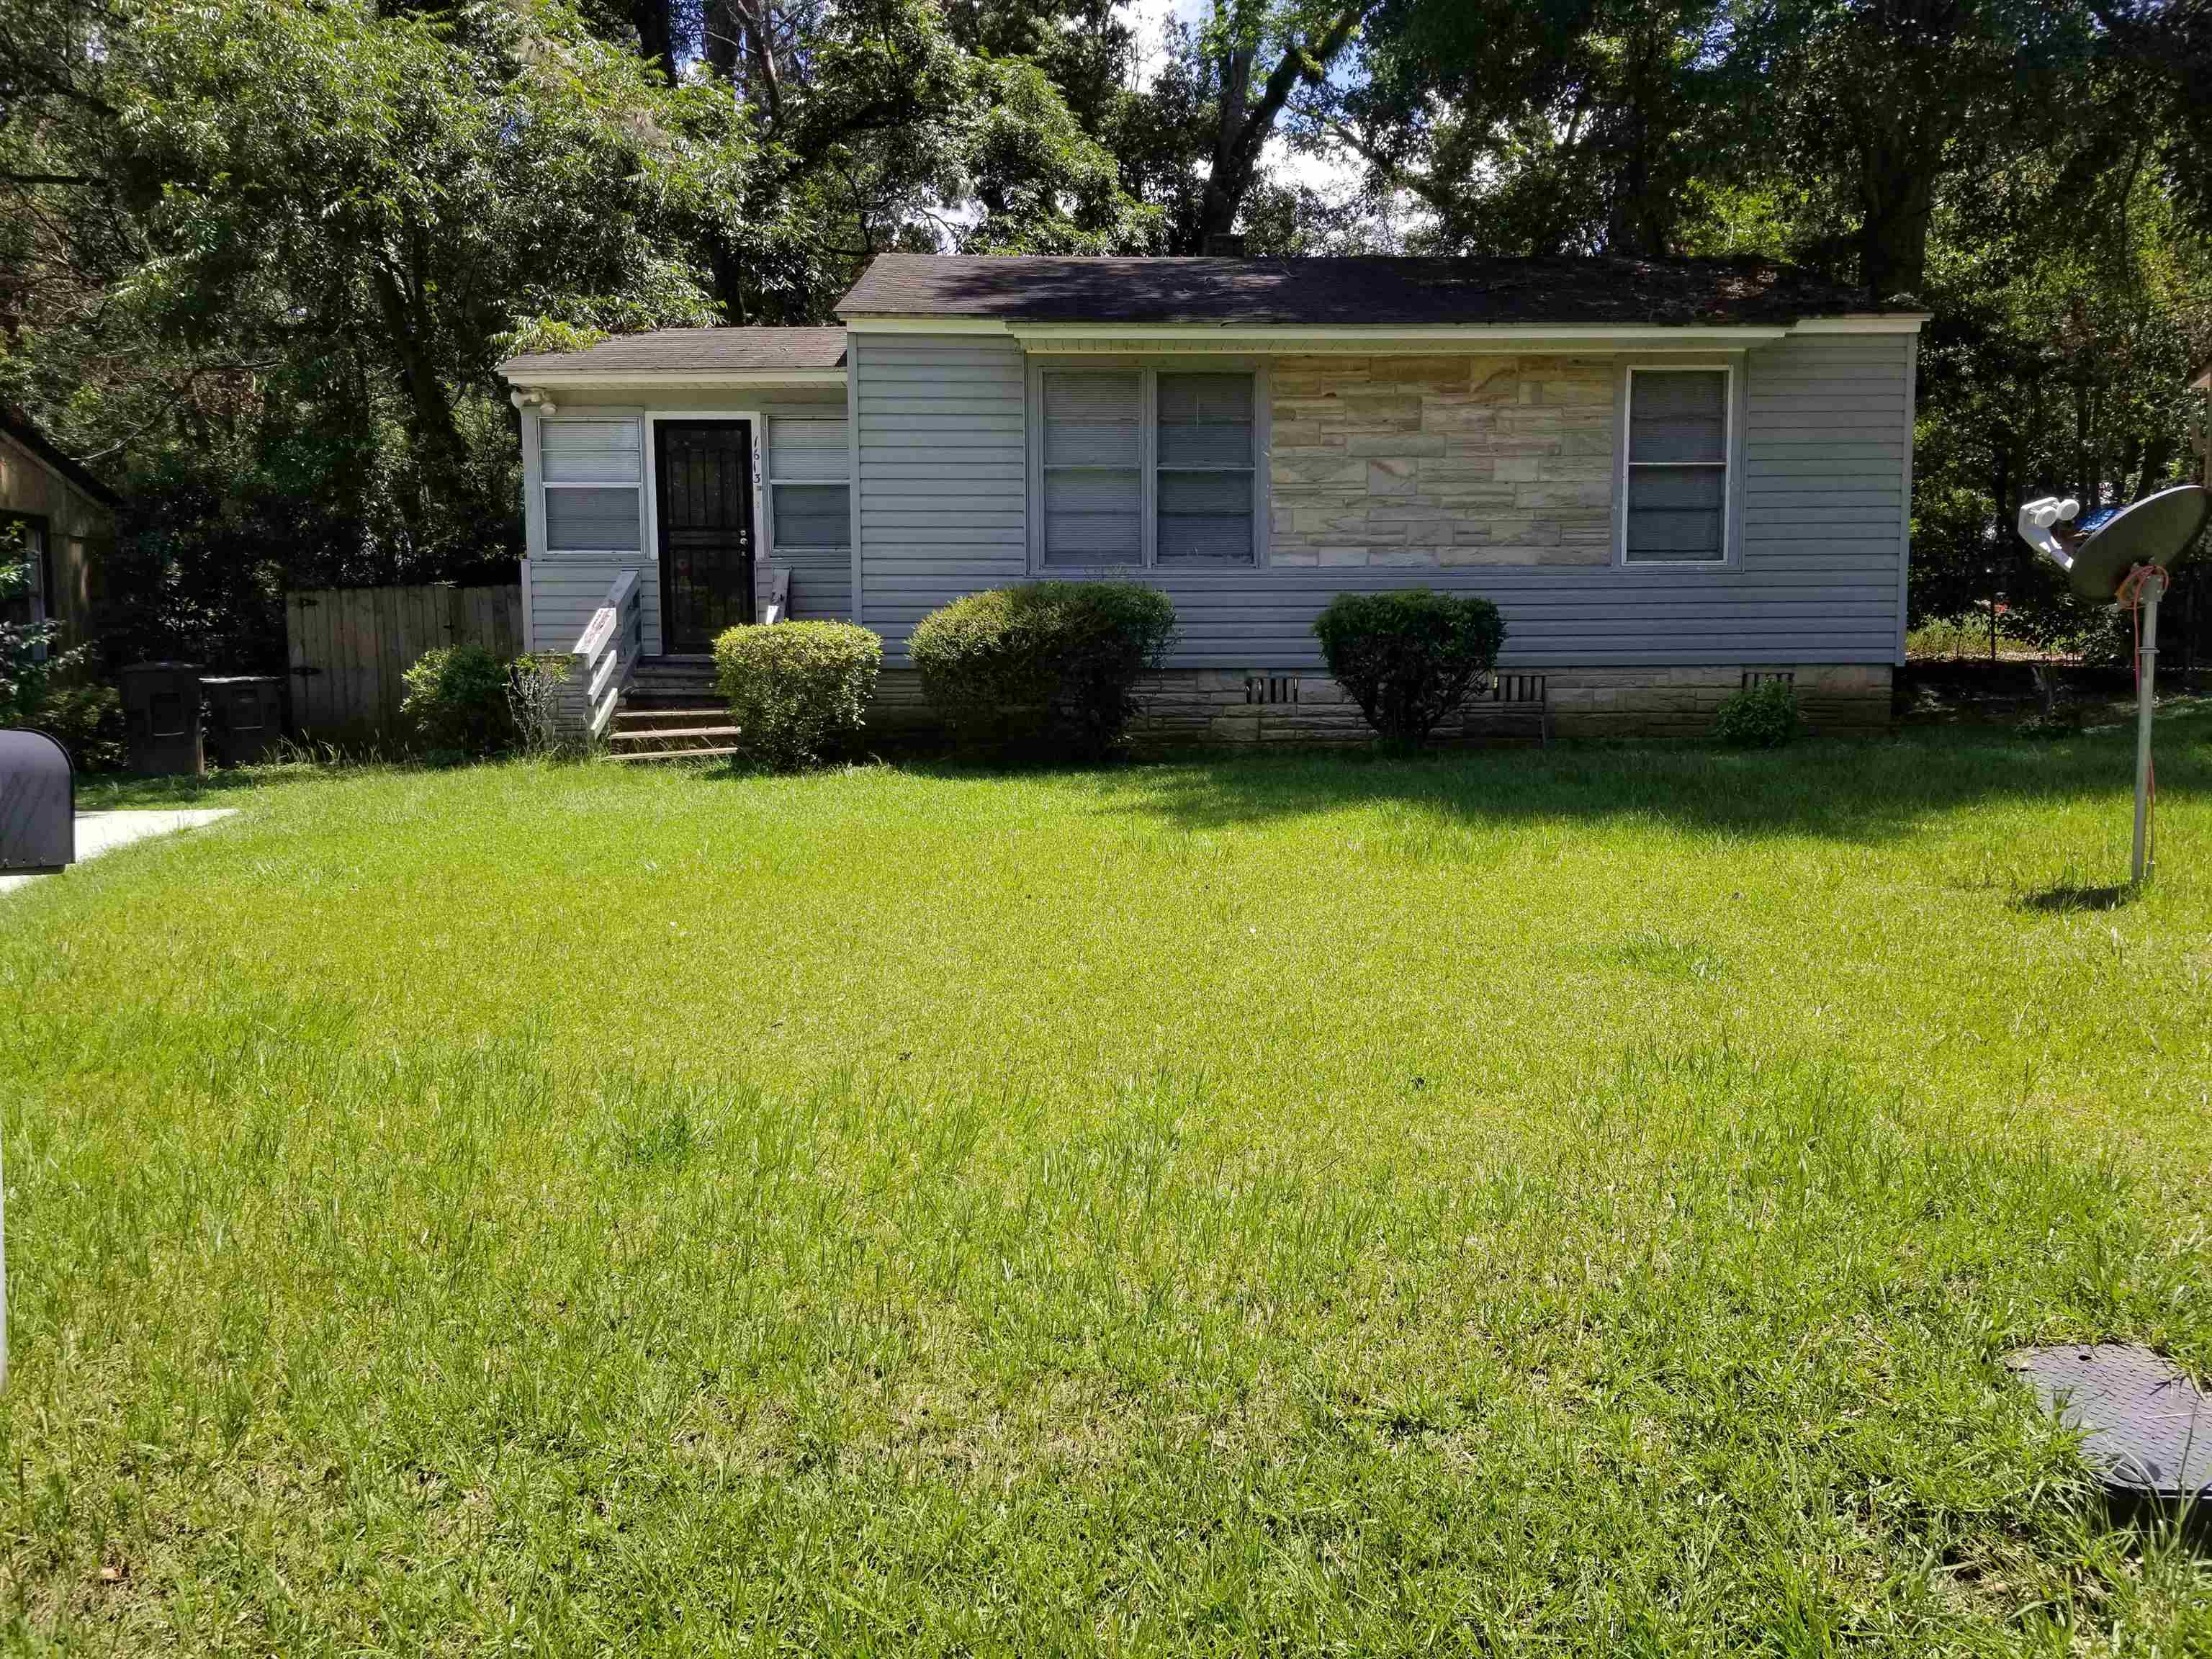 Perfect for students and investors.  Off campus though still close to FSU, TCC, and FAMU. Minutes from the Capital and I-10.Convenient to shopping, recreation, dining and entertainment. Off street parking, Nice size fenced in backyard. Price has been set to consider dwelling condition. Vacant